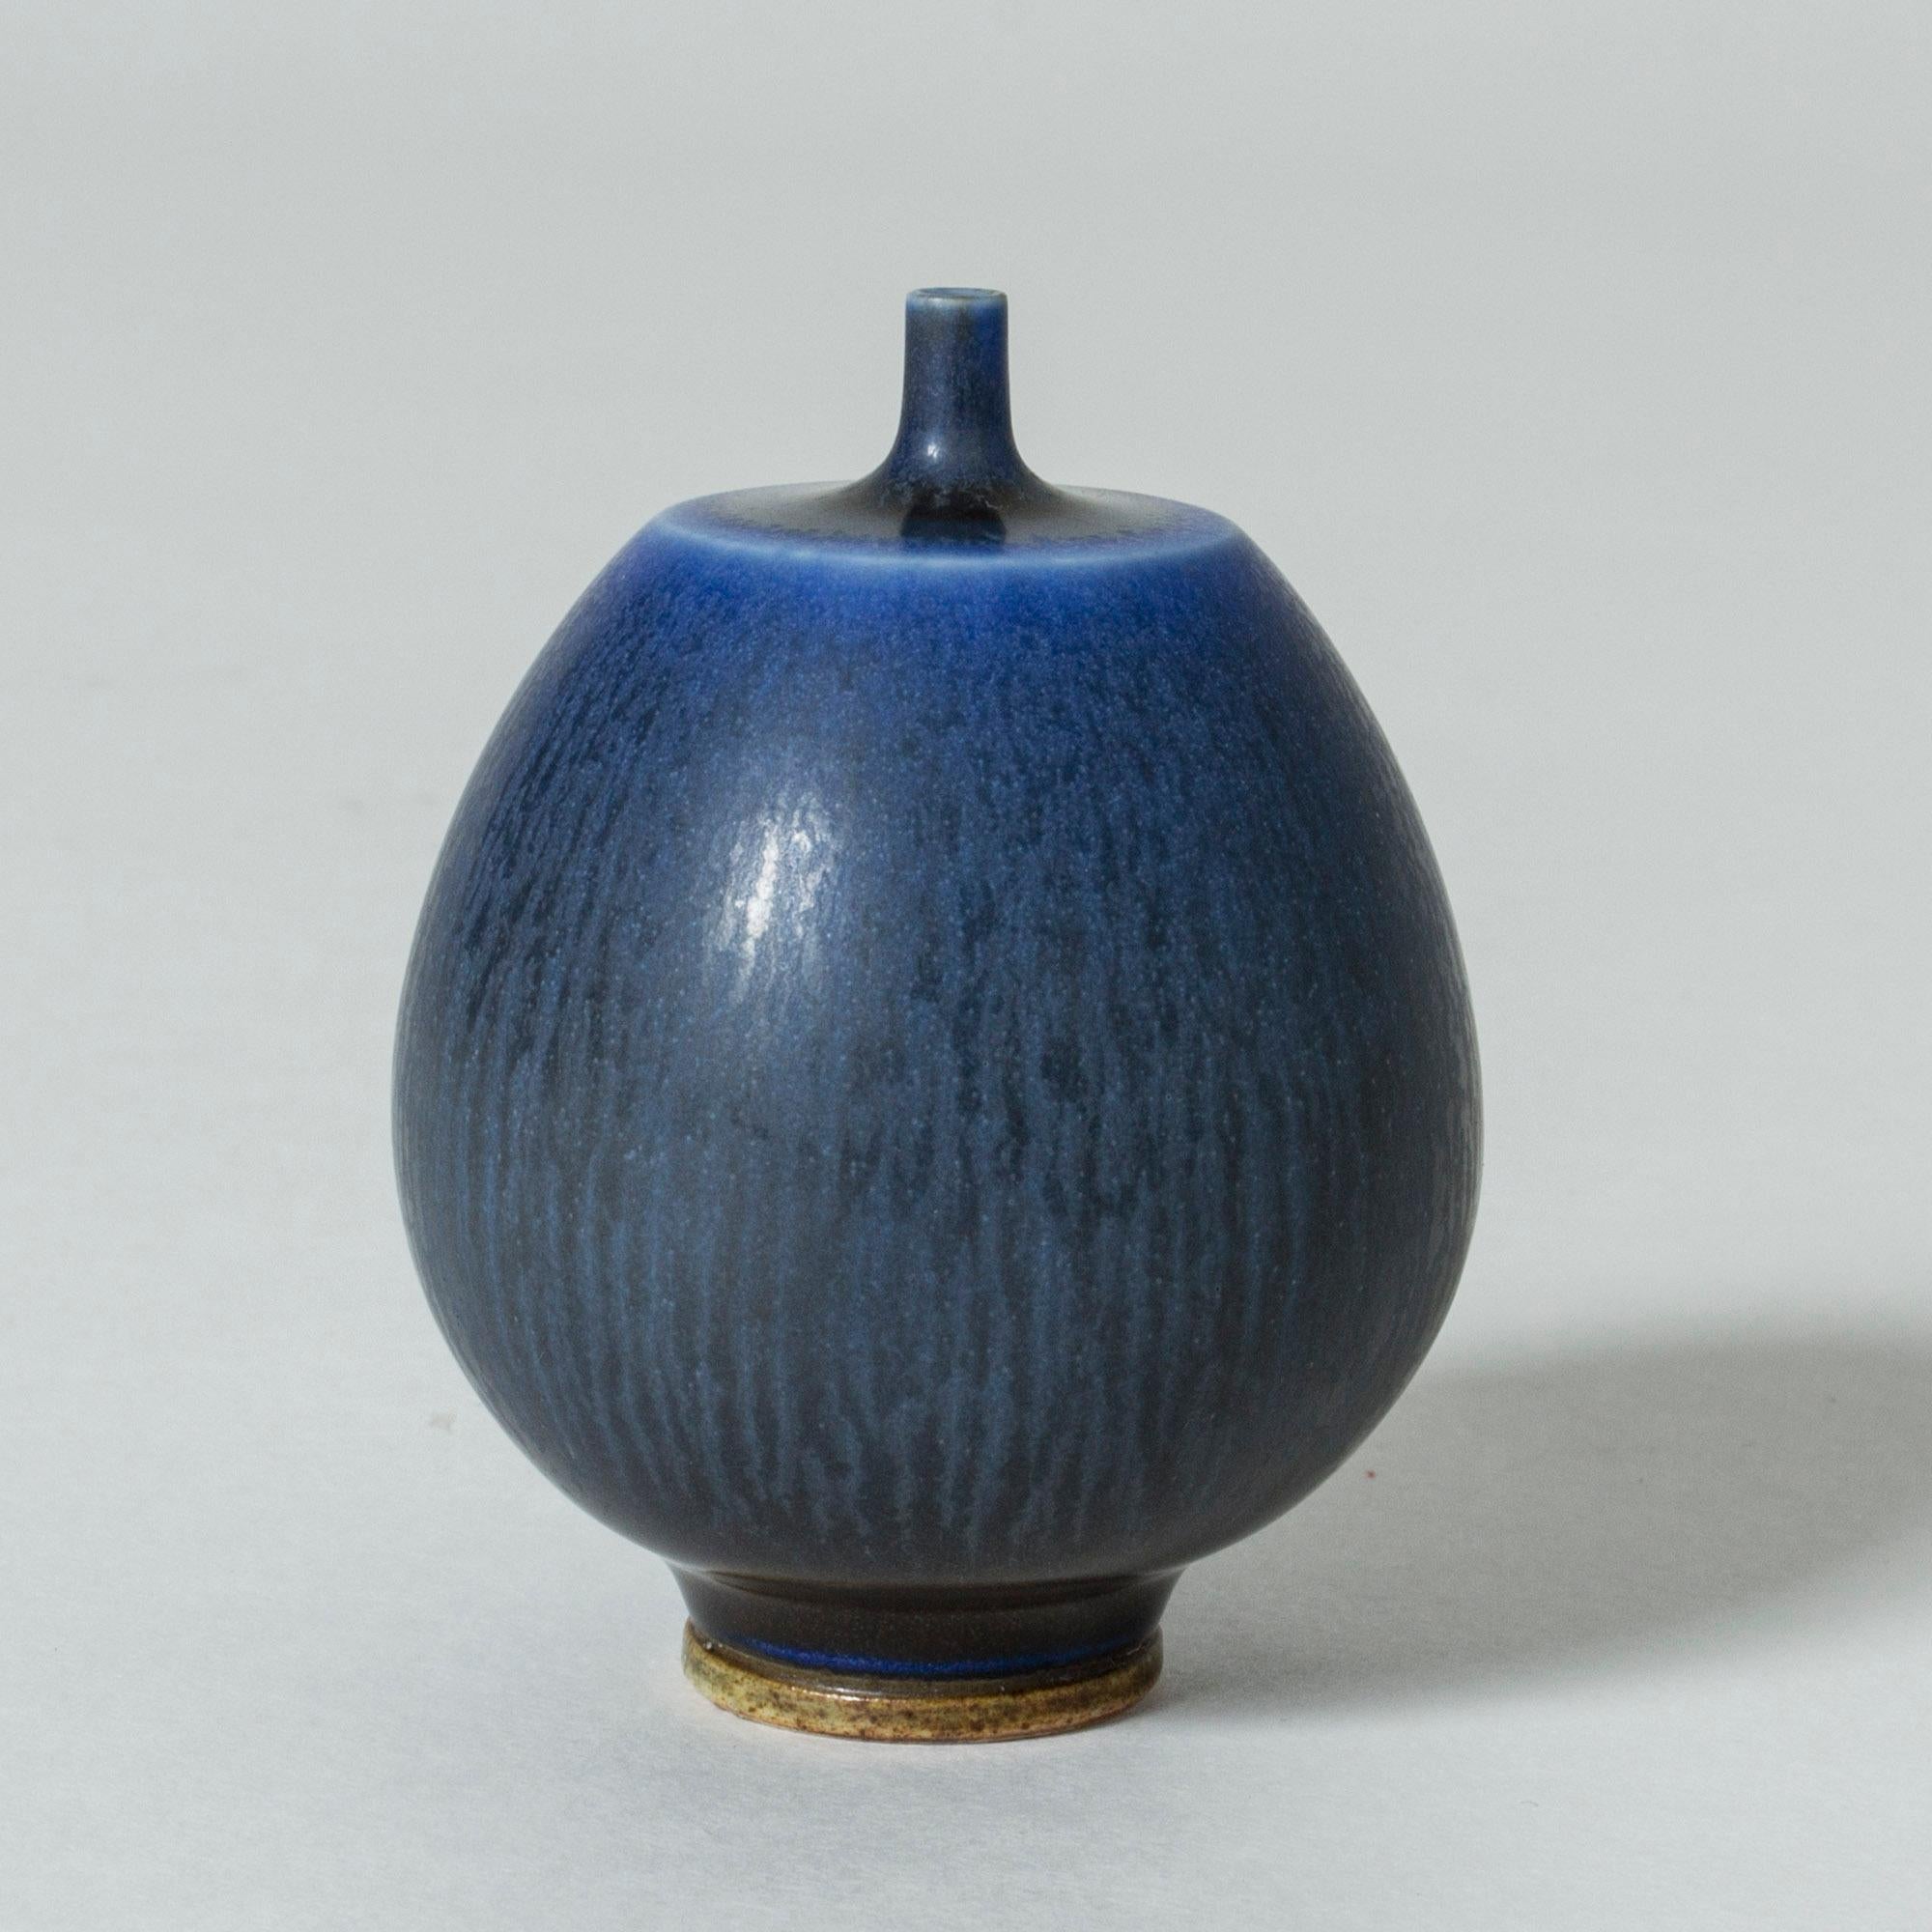 Lovely miniature stoneware vase by Berndt Friberg, with a edgy transition from the oval body to the thin neck. Intense dark blue hare’s fur glaze.